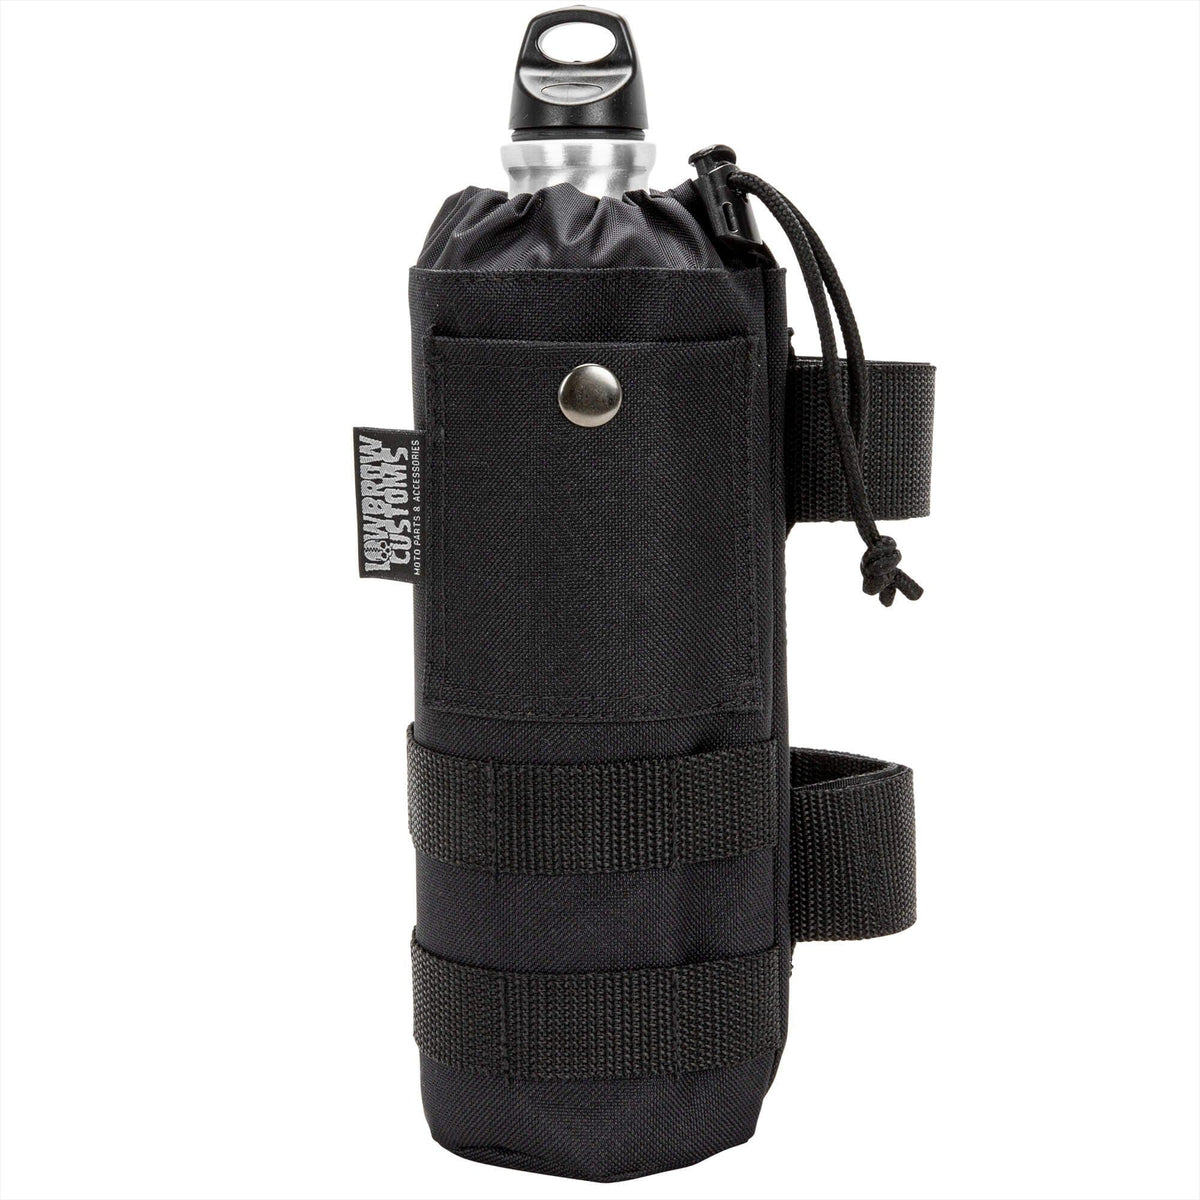 Lowbrow Customs Fuel Reserve Bottle and Carrier 2.0 Combo - Save $4.95!